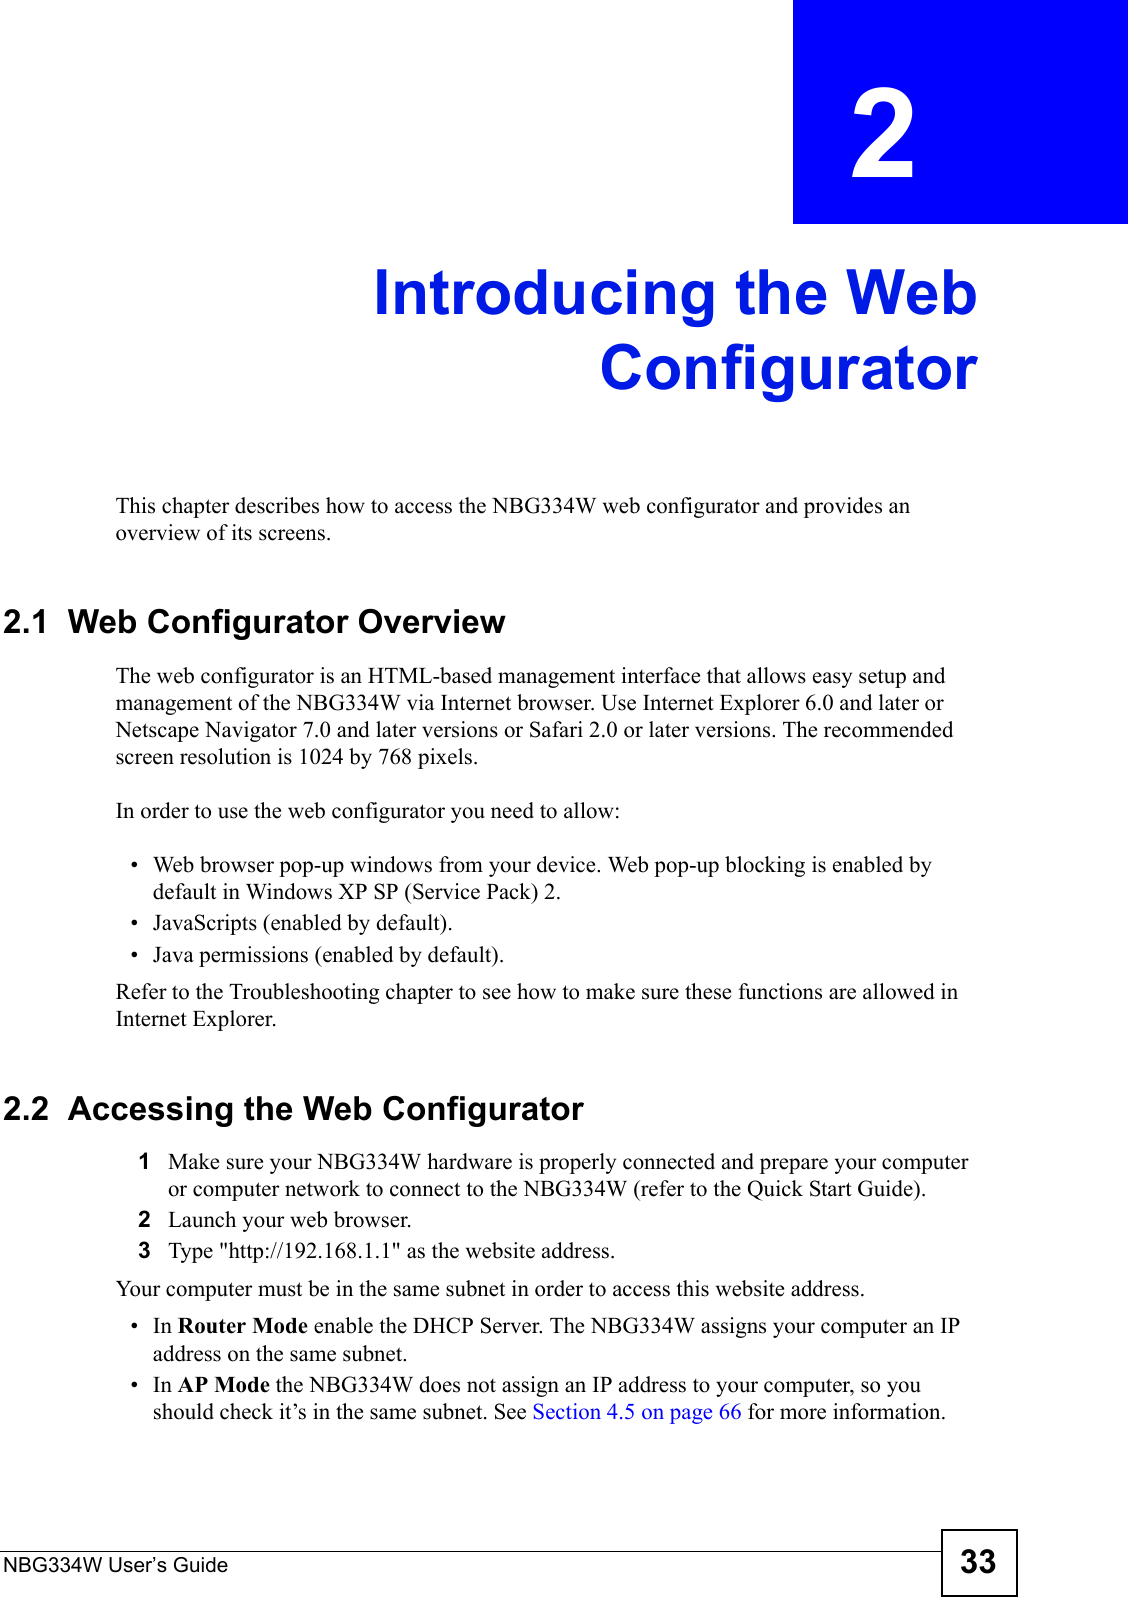 NBG334W User’s Guide 33CHAPTER  2 Introducing the WebConfiguratorThis chapter describes how to access the NBG334W web configurator and provides an overview of its screens.2.1  Web Configurator OverviewThe web configurator is an HTML-based management interface that allows easy setup and management of the NBG334W via Internet browser. Use Internet Explorer 6.0 and later or Netscape Navigator 7.0 and later versions or Safari 2.0 or later versions. The recommended screen resolution is 1024 by 768 pixels.In order to use the web configurator you need to allow:• Web browser pop-up windows from your device. Web pop-up blocking is enabled by default in Windows XP SP (Service Pack) 2.• JavaScripts (enabled by default).• Java permissions (enabled by default).Refer to the Troubleshooting chapter to see how to make sure these functions are allowed in Internet Explorer.2.2  Accessing the Web Configurator1Make sure your NBG334W hardware is properly connected and prepare your computer or computer network to connect to the NBG334W (refer to the Quick Start Guide).2Launch your web browser.3Type &quot;http://192.168.1.1&quot; as the website address. Your computer must be in the same subnet in order to access this website address.•In Router Mode enable the DHCP Server. The NBG334W assigns your computer an IP address on the same subnet. •In AP Mode the NBG334W does not assign an IP address to your computer, so you should check it’s in the same subnet. See Section 4.5 on page 66 for more information.